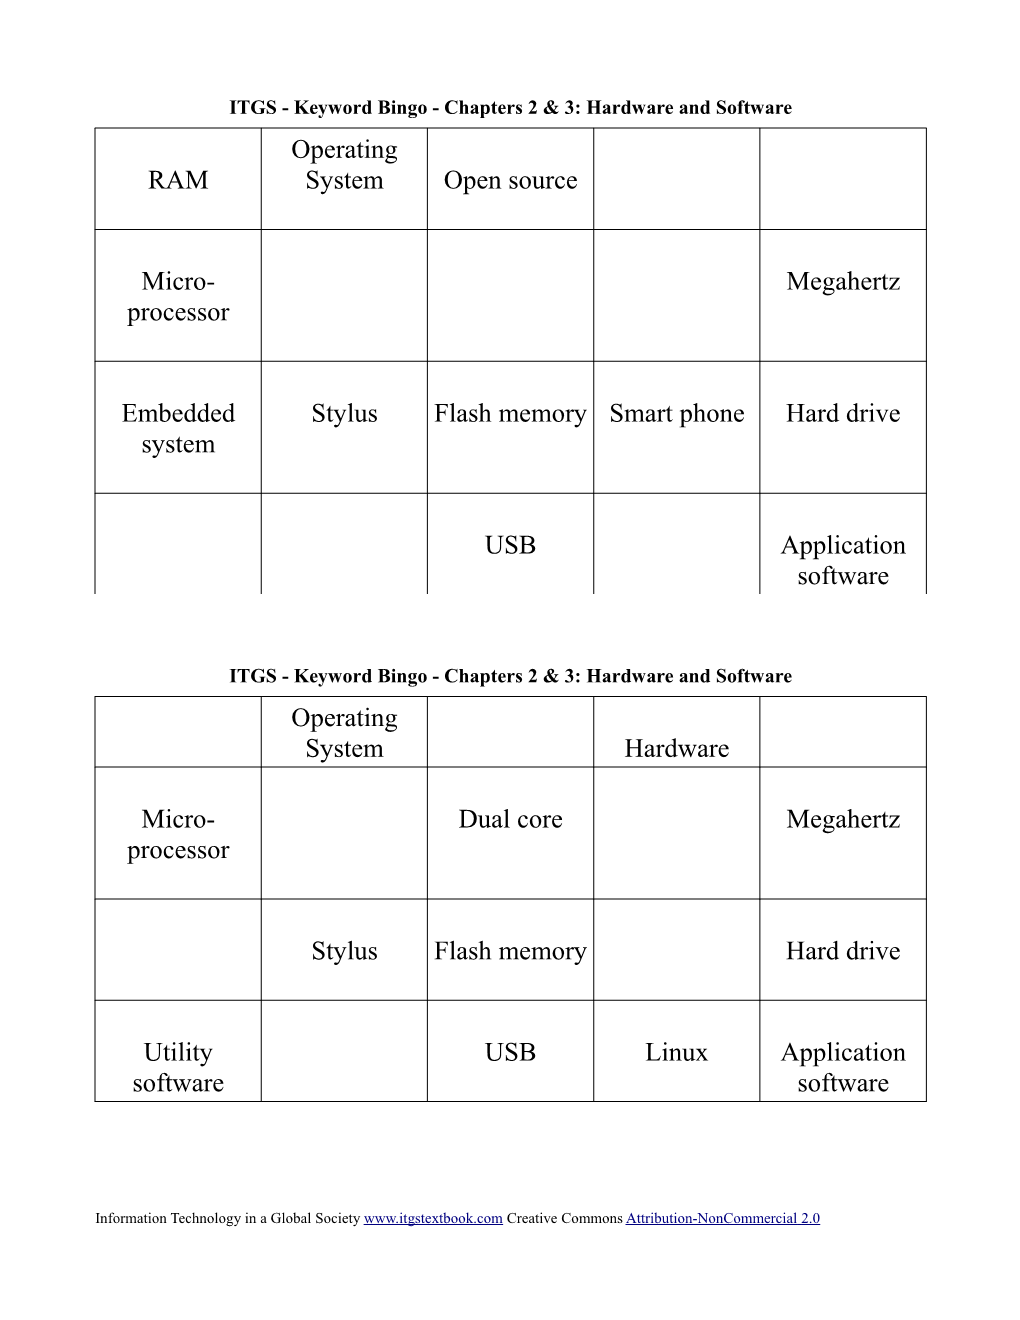 ITGS - Keyword Bingo - Chapters 2 & 3: Hardware and Software